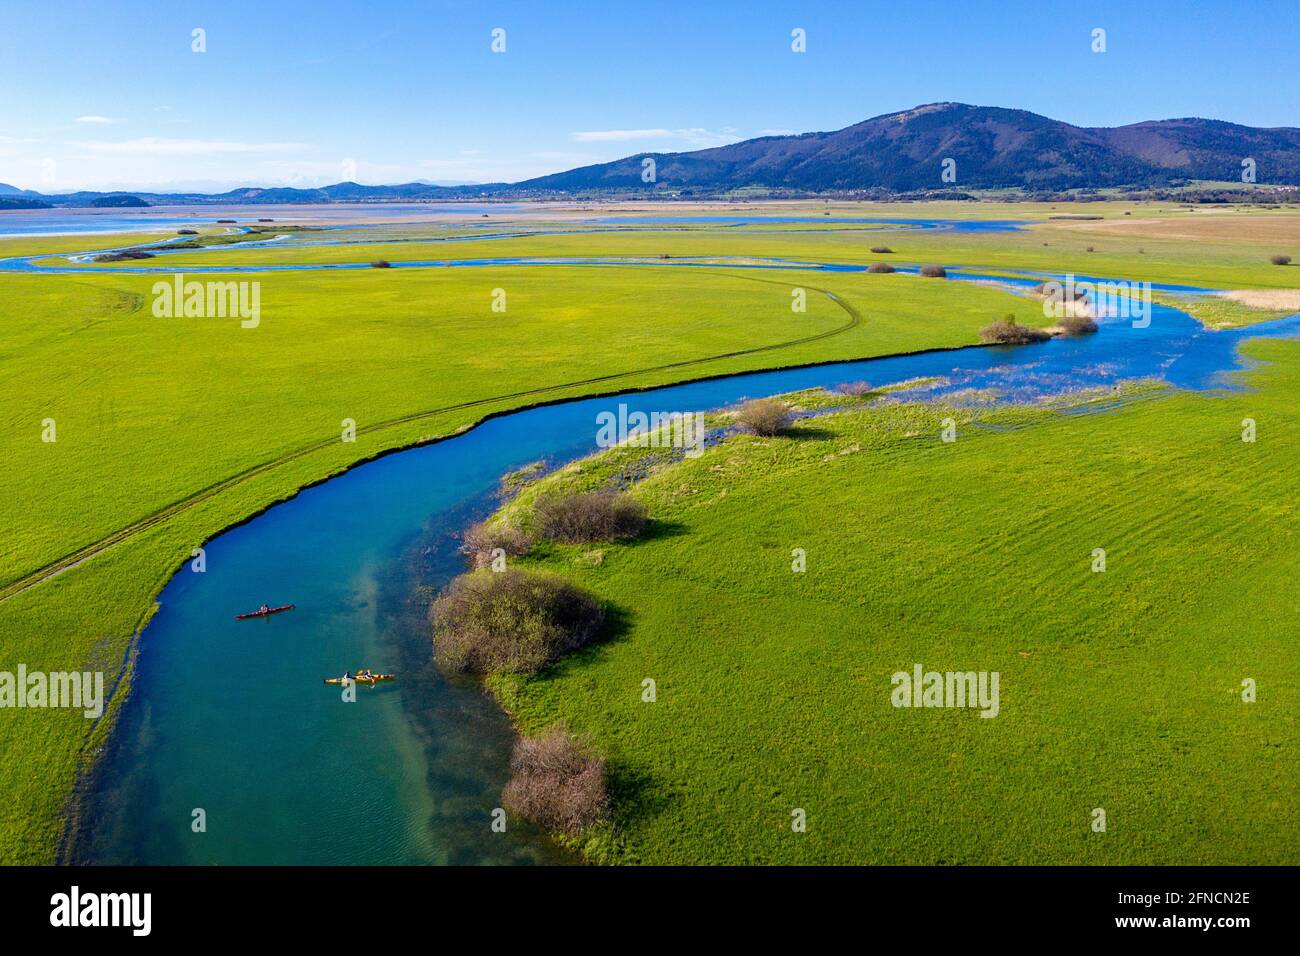 Top aerial view of two kayaks in tributary that flows into Cerknica Lake, beautiful view over the lake and mountains, taken by drone, Slovenia Stock Photo